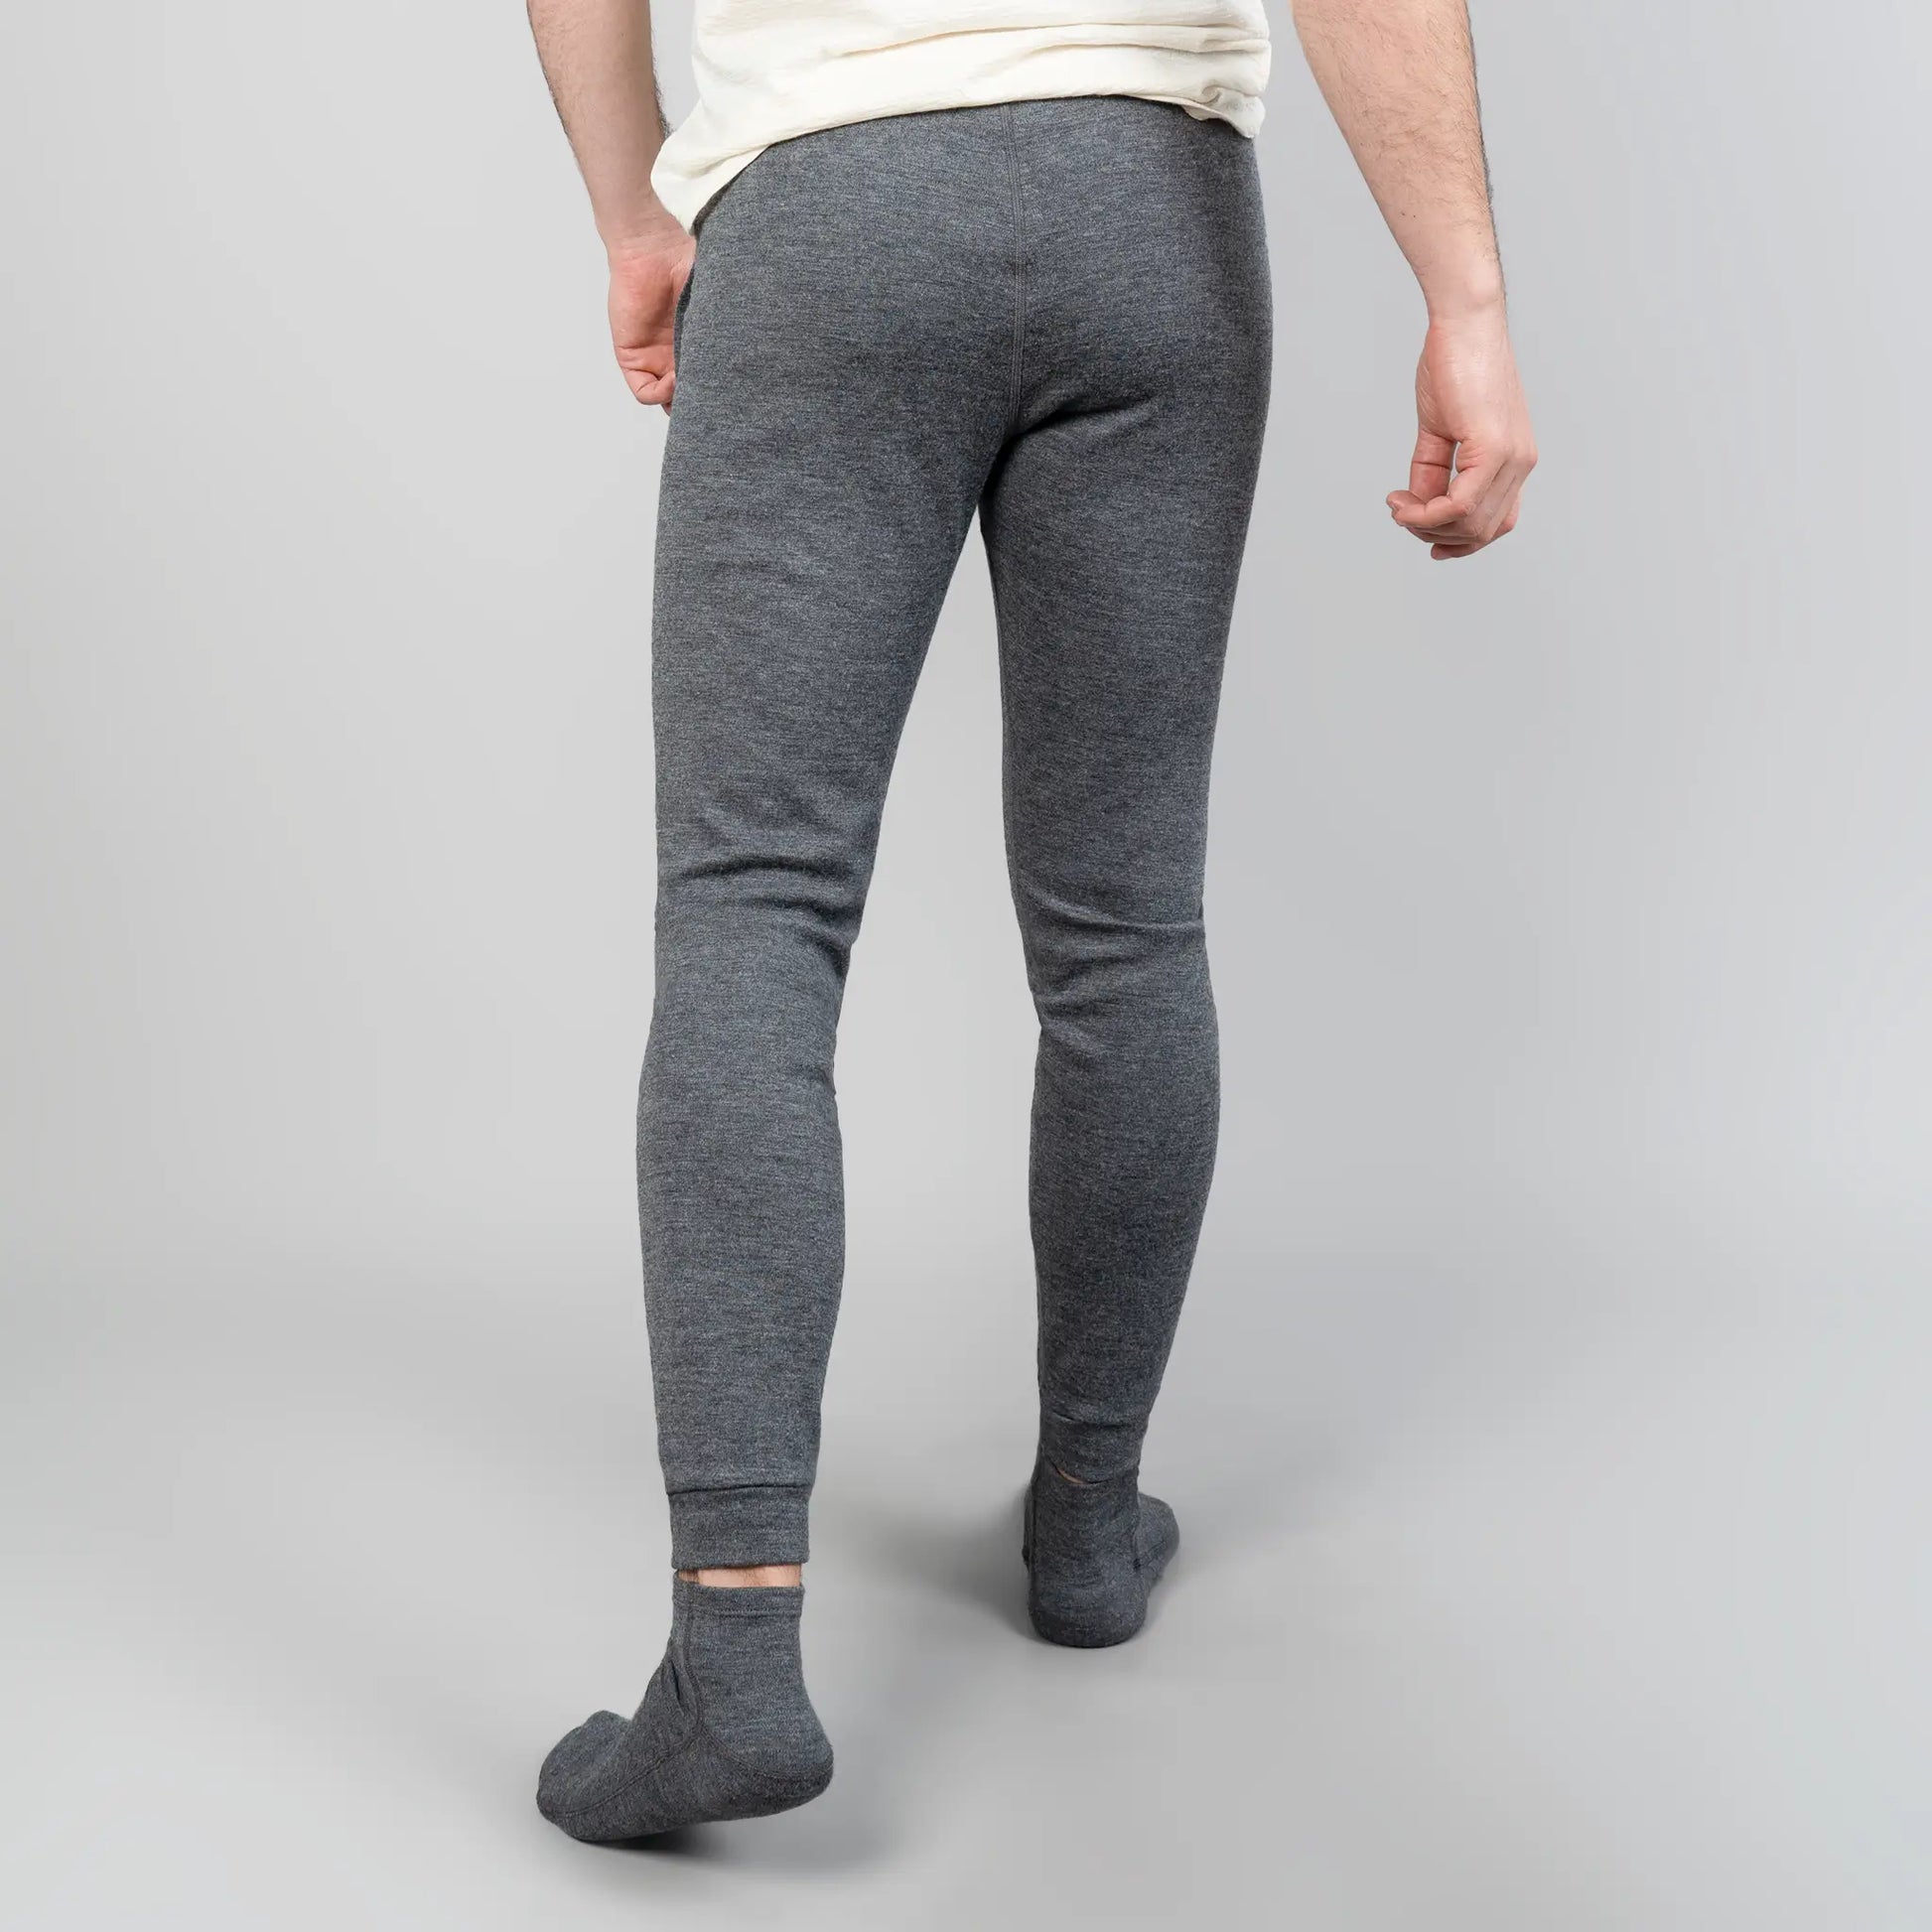 mens ultra soft sweatpants midweight color gray